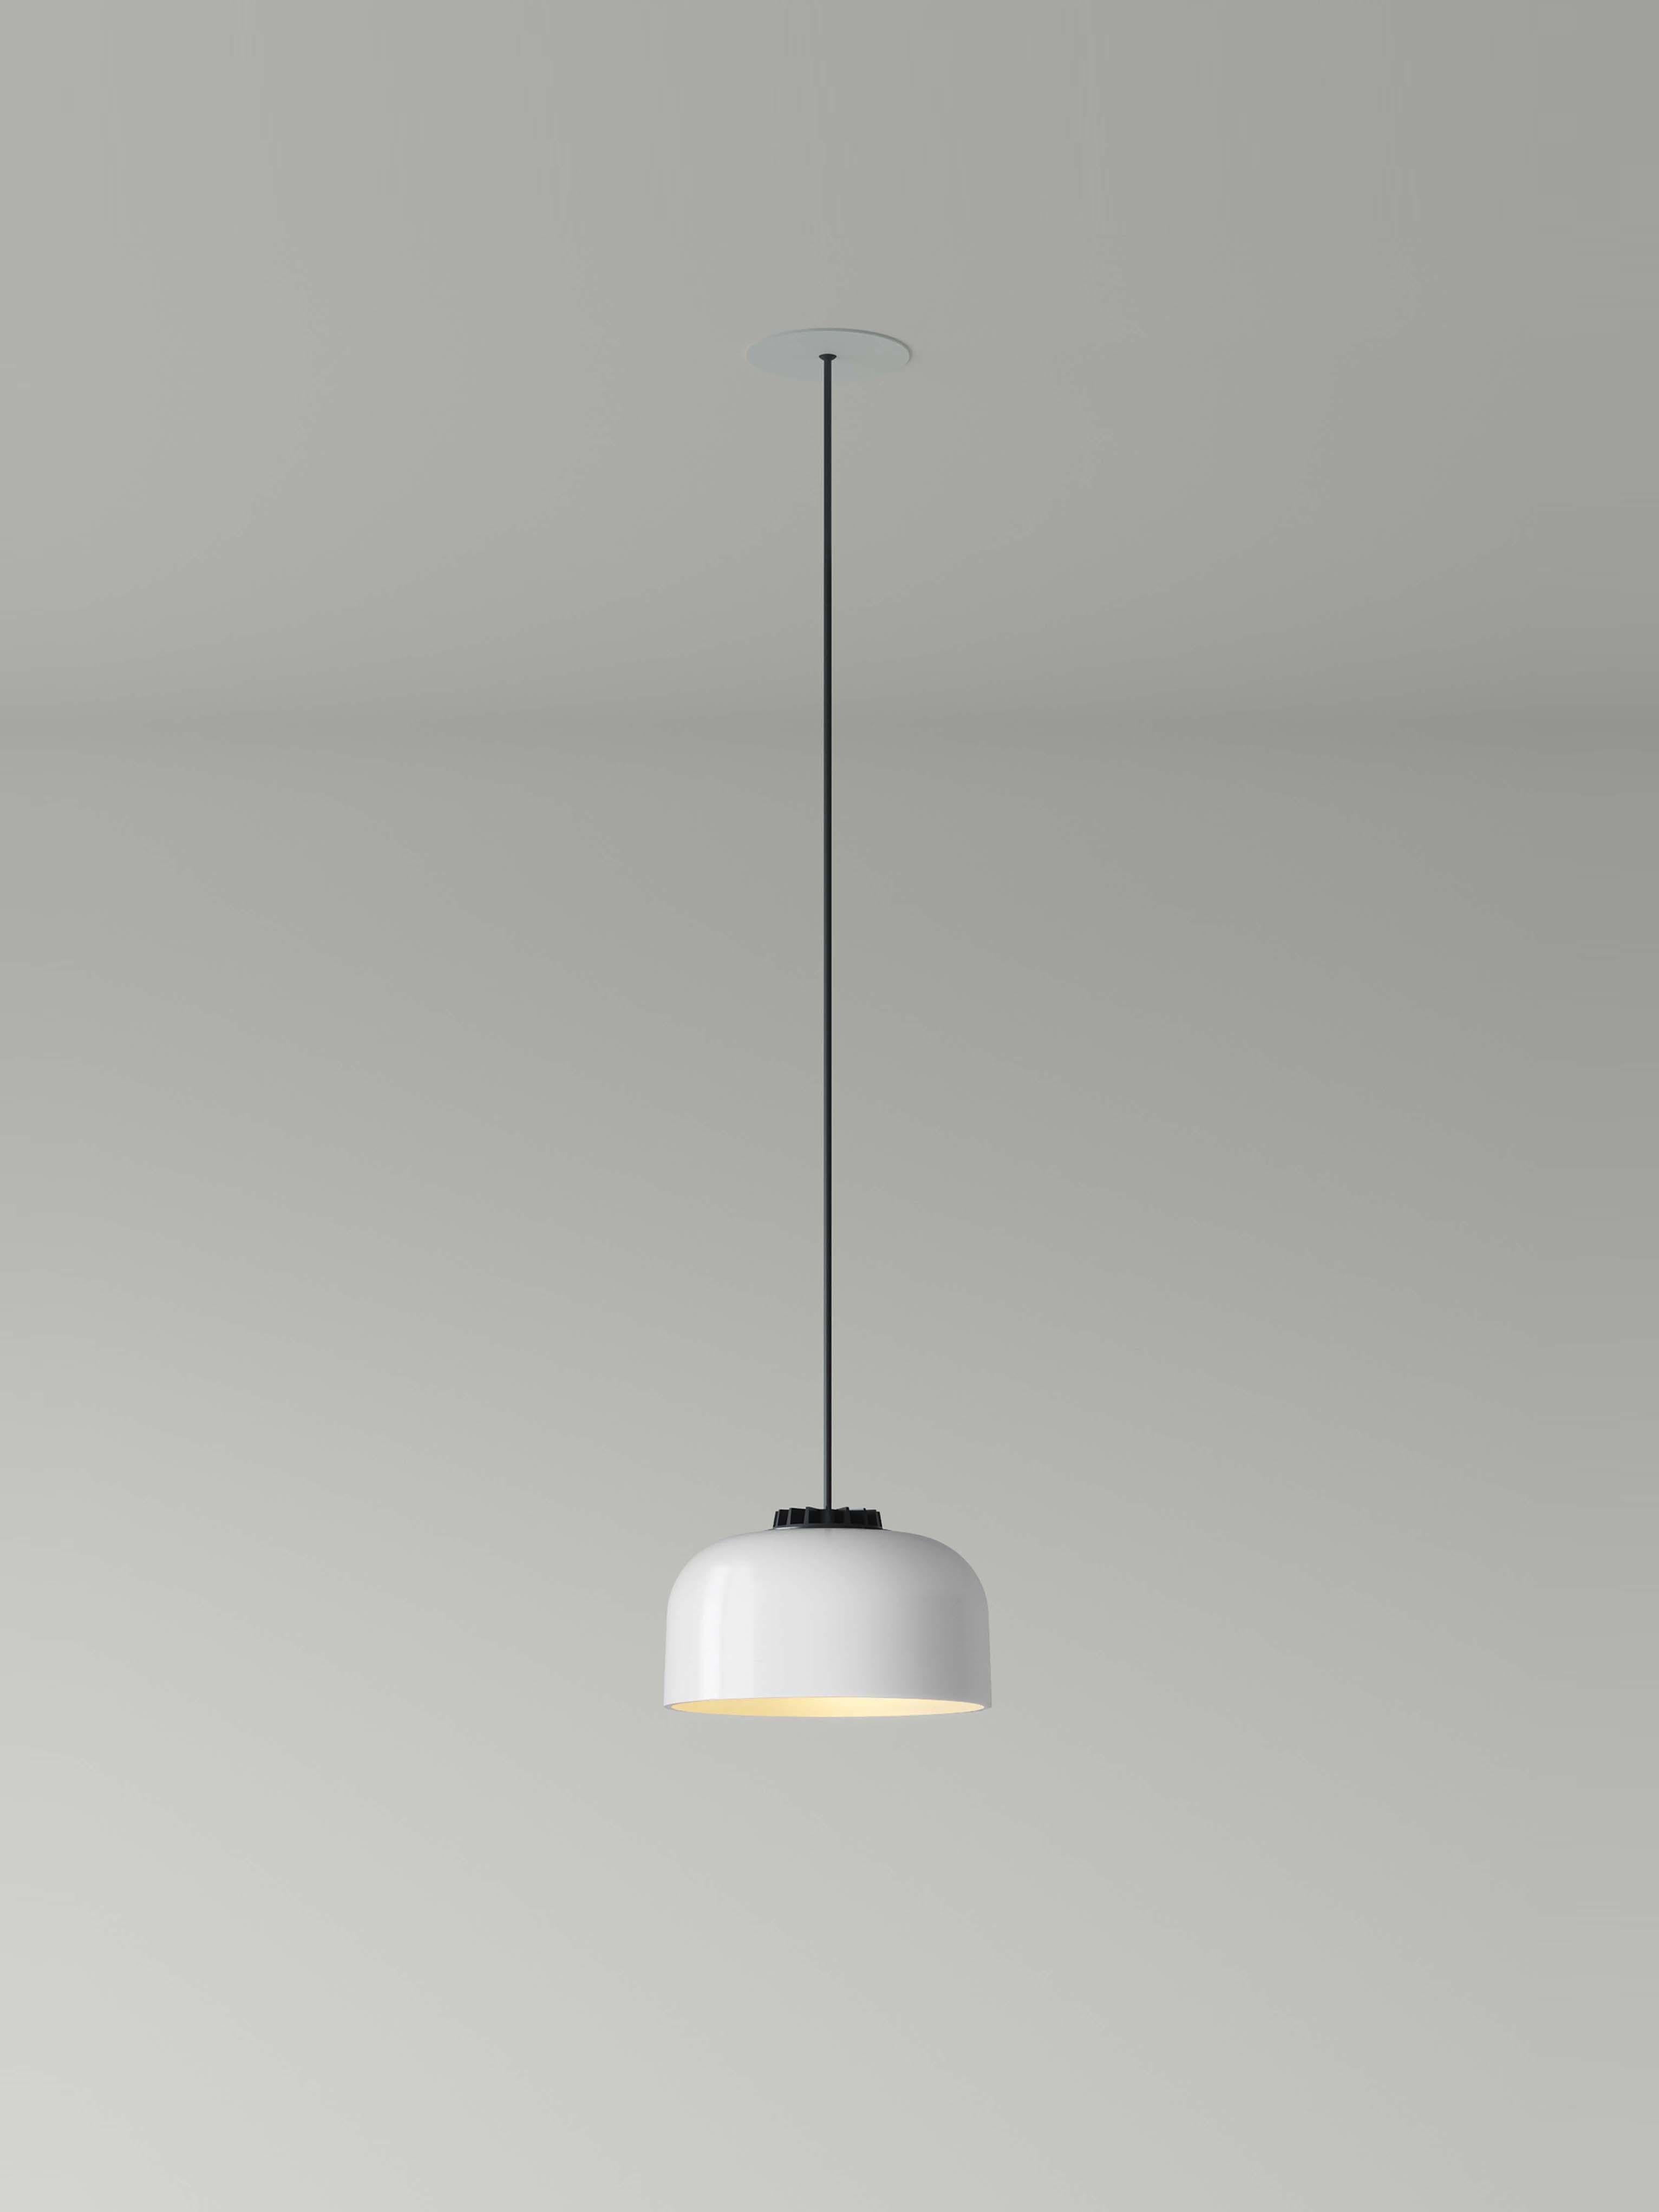 Large white headhat bowl pendant lamp by Santa & Cole
Dimensions: d 20 x h 12 cm
Materials: Metal, ceramic.
Cable lenght: 3mts.
Available in white or black ceramic. Available in 2 cable lengths: 3mts, 8mts.
Available in 2 canopy colors: black